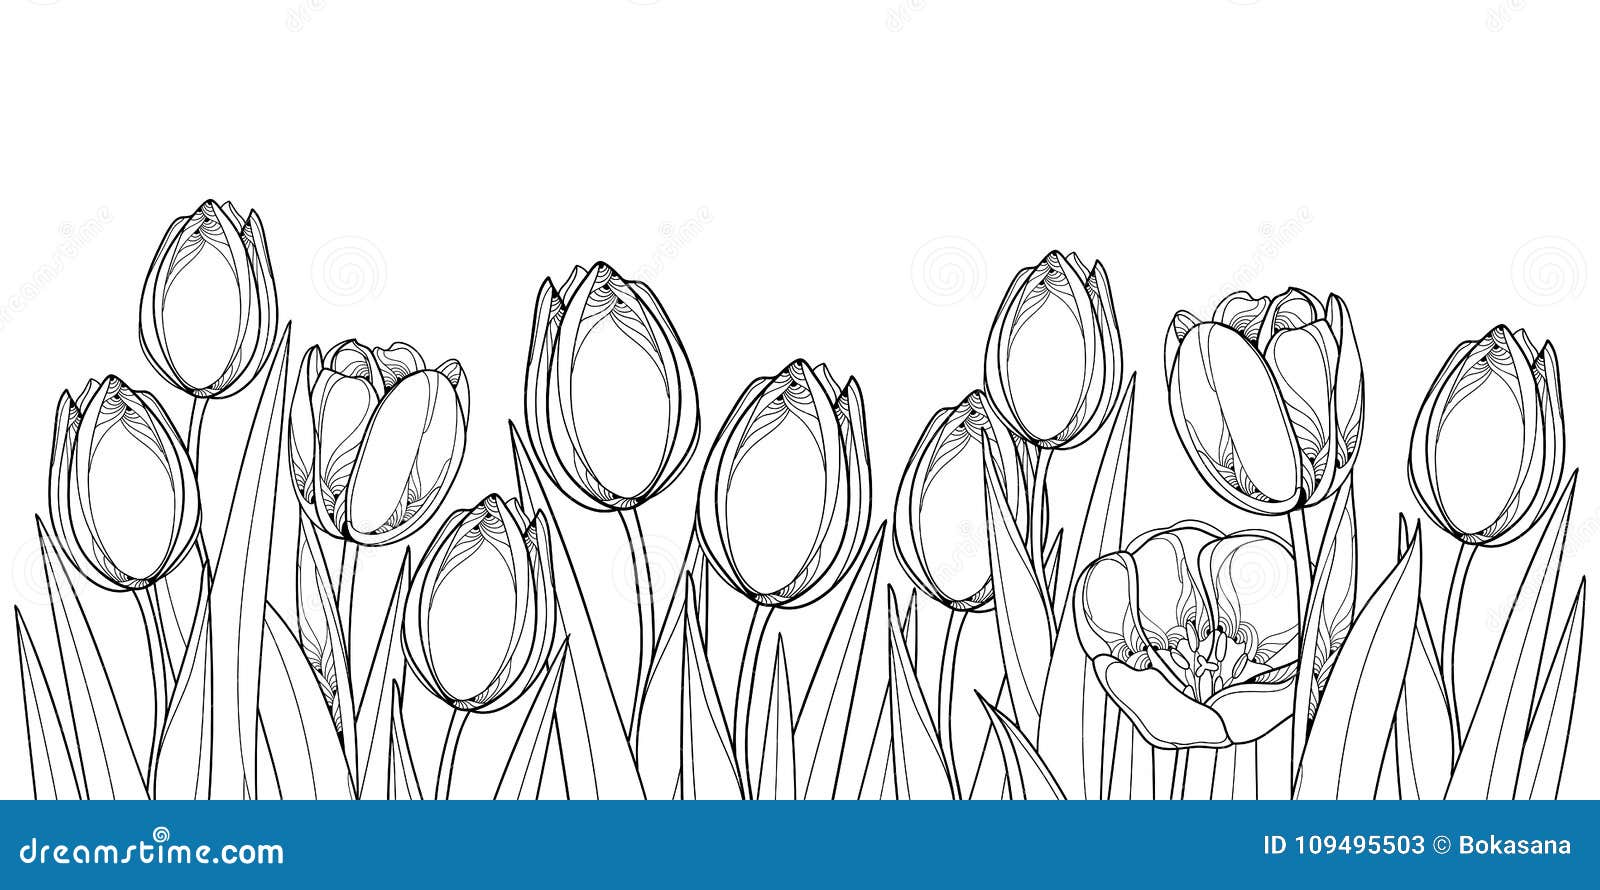  horizontal border with outline tulip flowers, bud and ornate leaves in black  on white background.